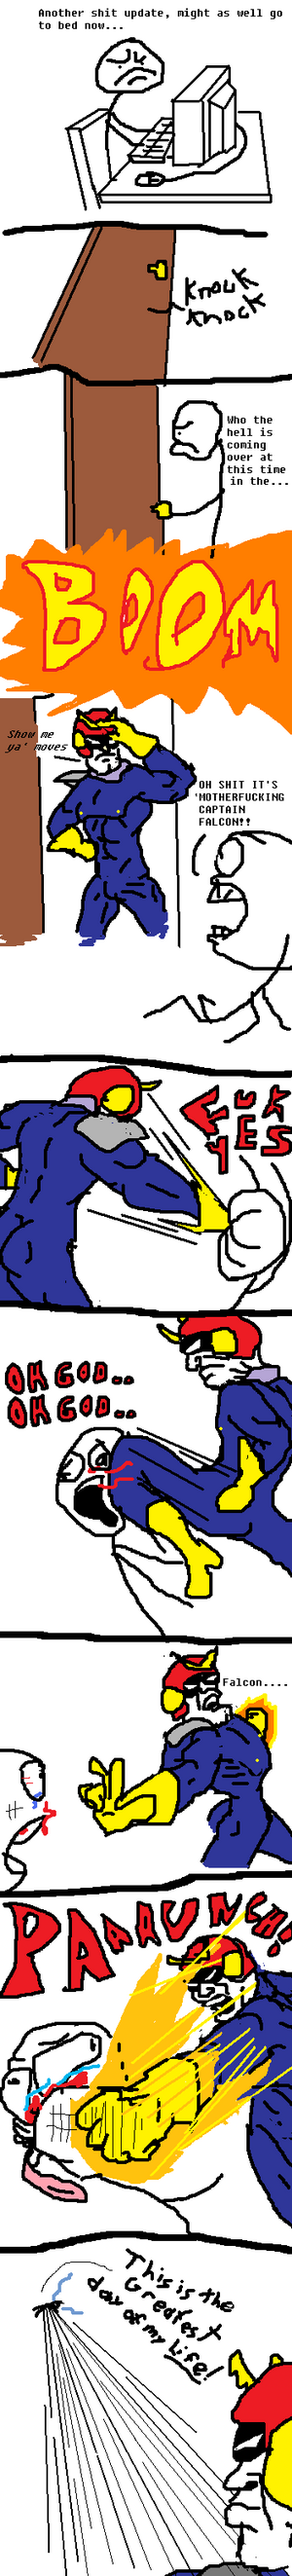 Captain Falcon came to my hous.png